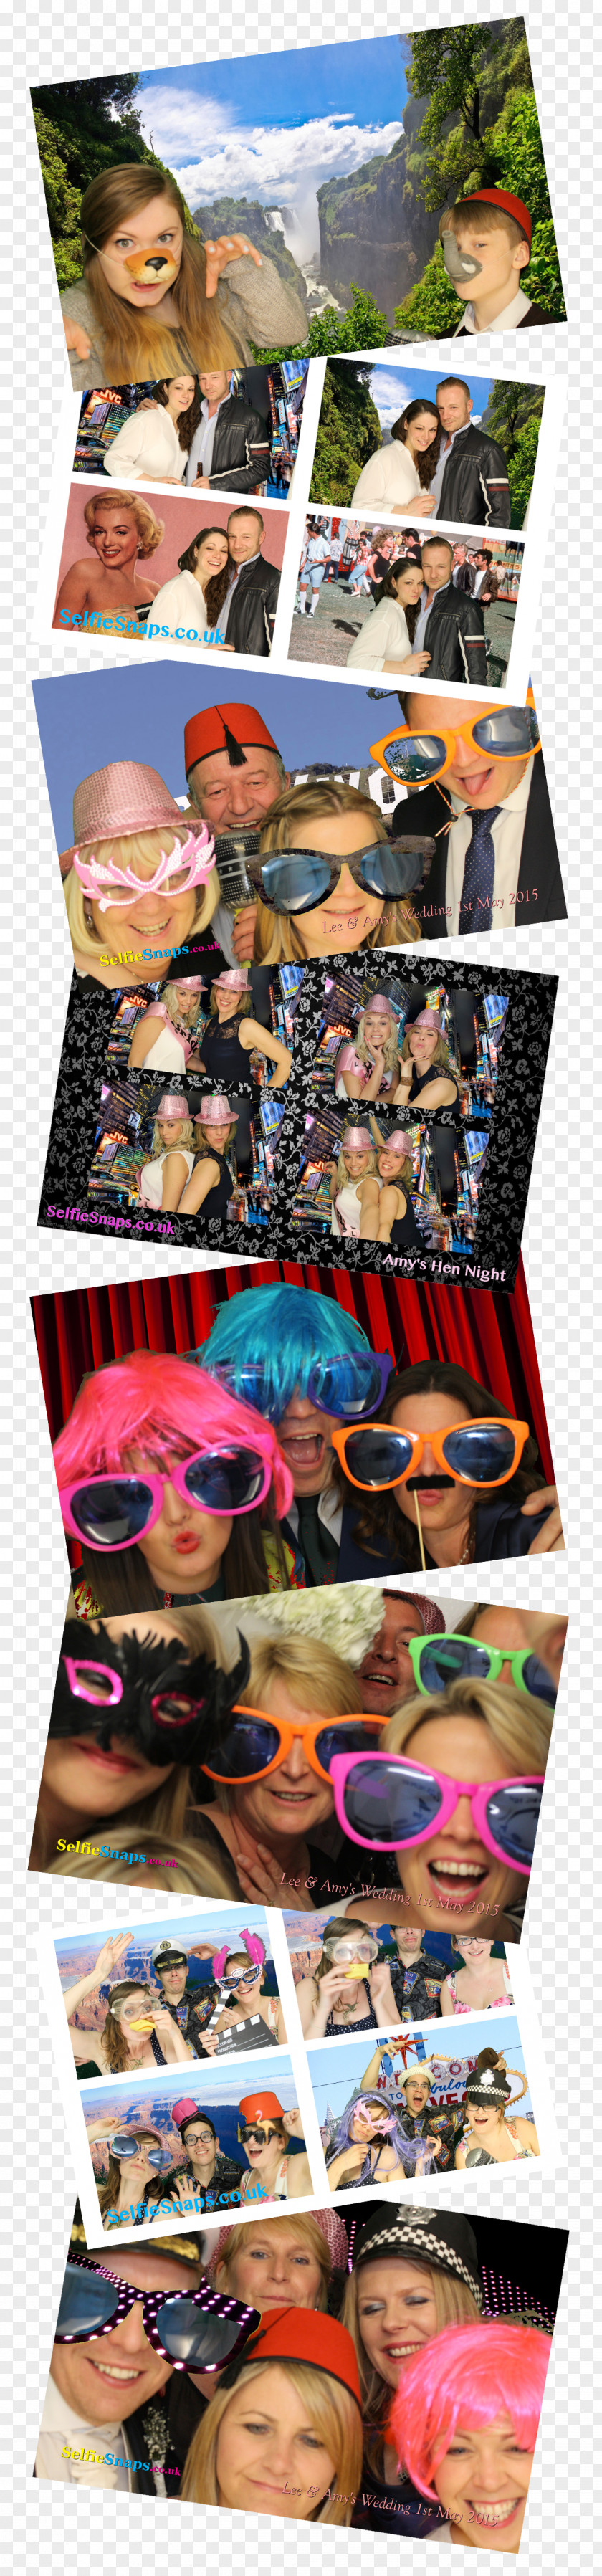 Photographer Photo Booth Photomontage Photography PNG